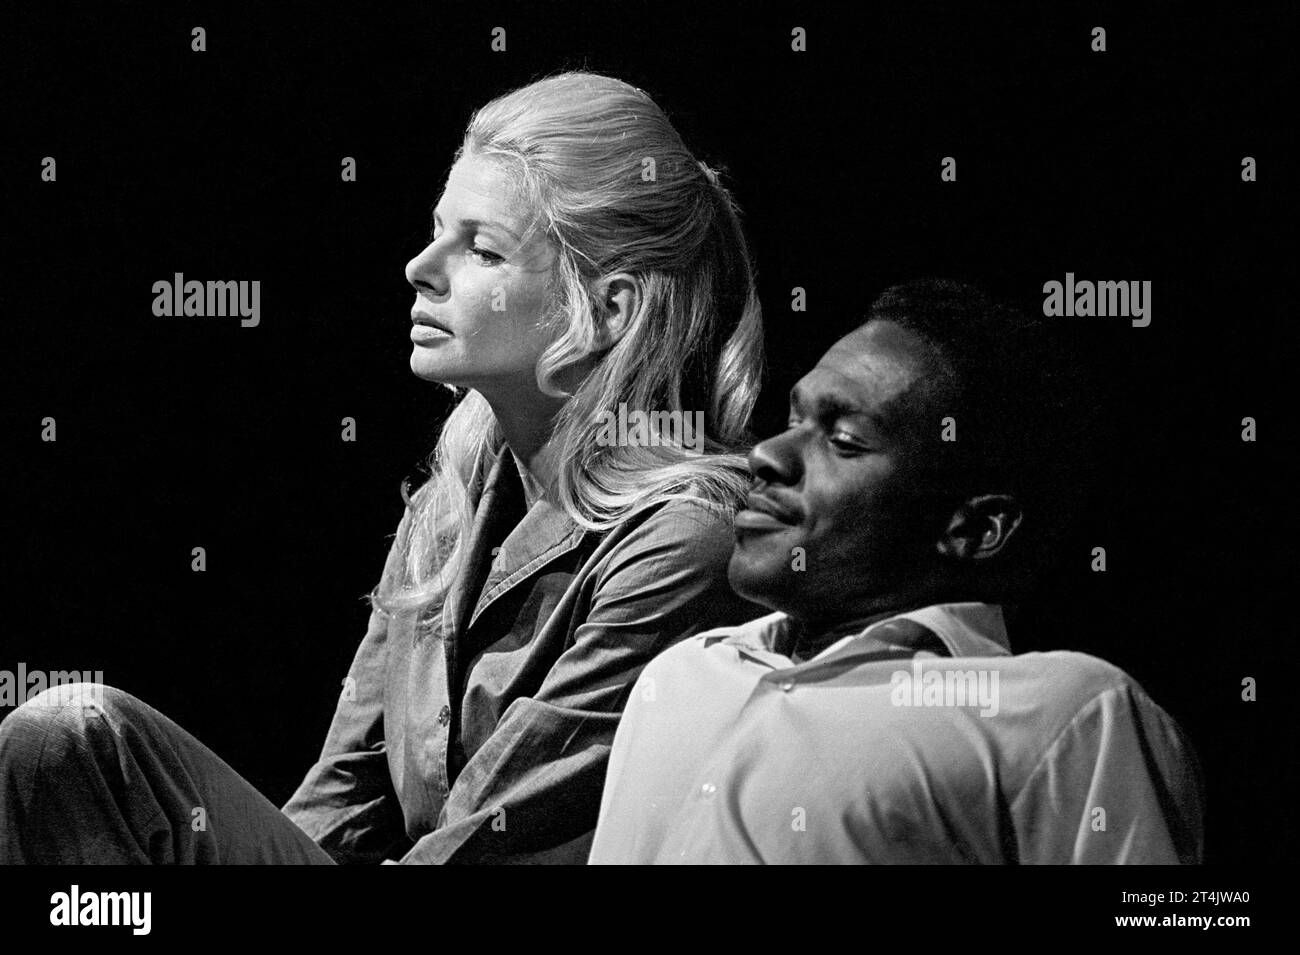 Mary Peach (Gail), Rudolph Walker (Scott) in DON'T GAS THE BLACKS by Barry Reckord at the Open Space Theatre, London WC1  21/10/1969           design: Len Drinkwater  director: Lloyd Reckord Stock Photo